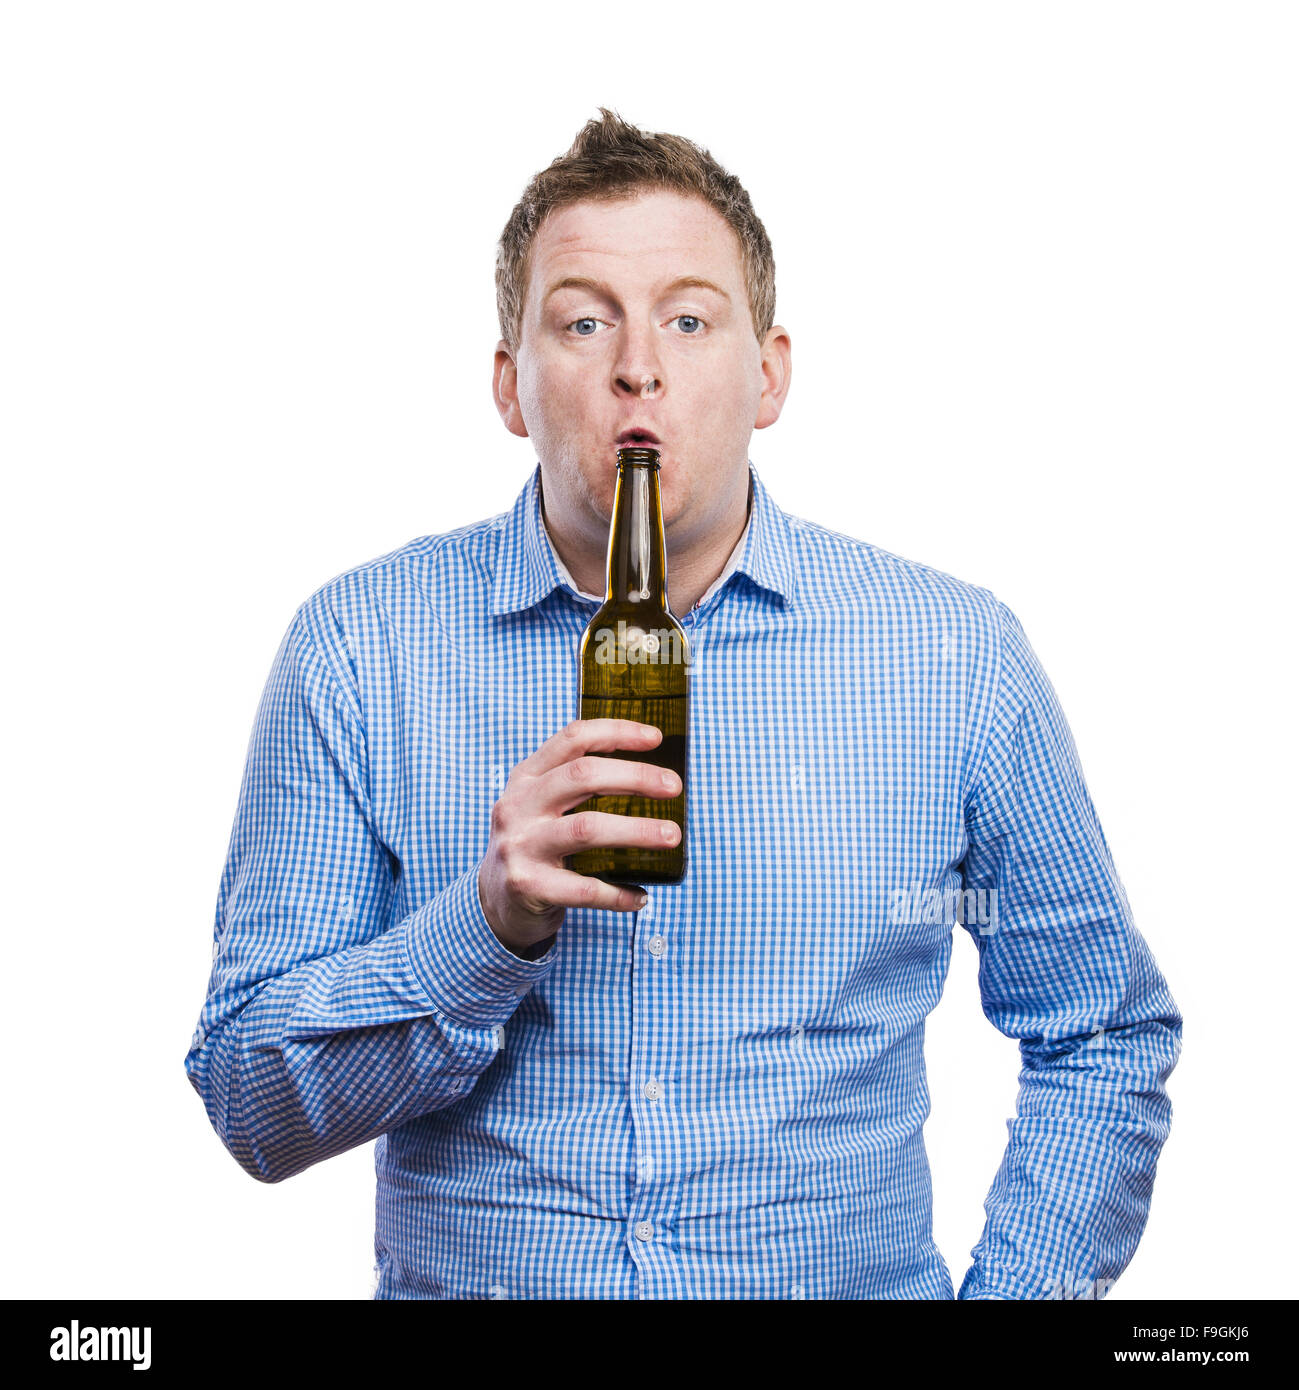 Funny young drunk man holding a beer bottle. Studio shot on white ...